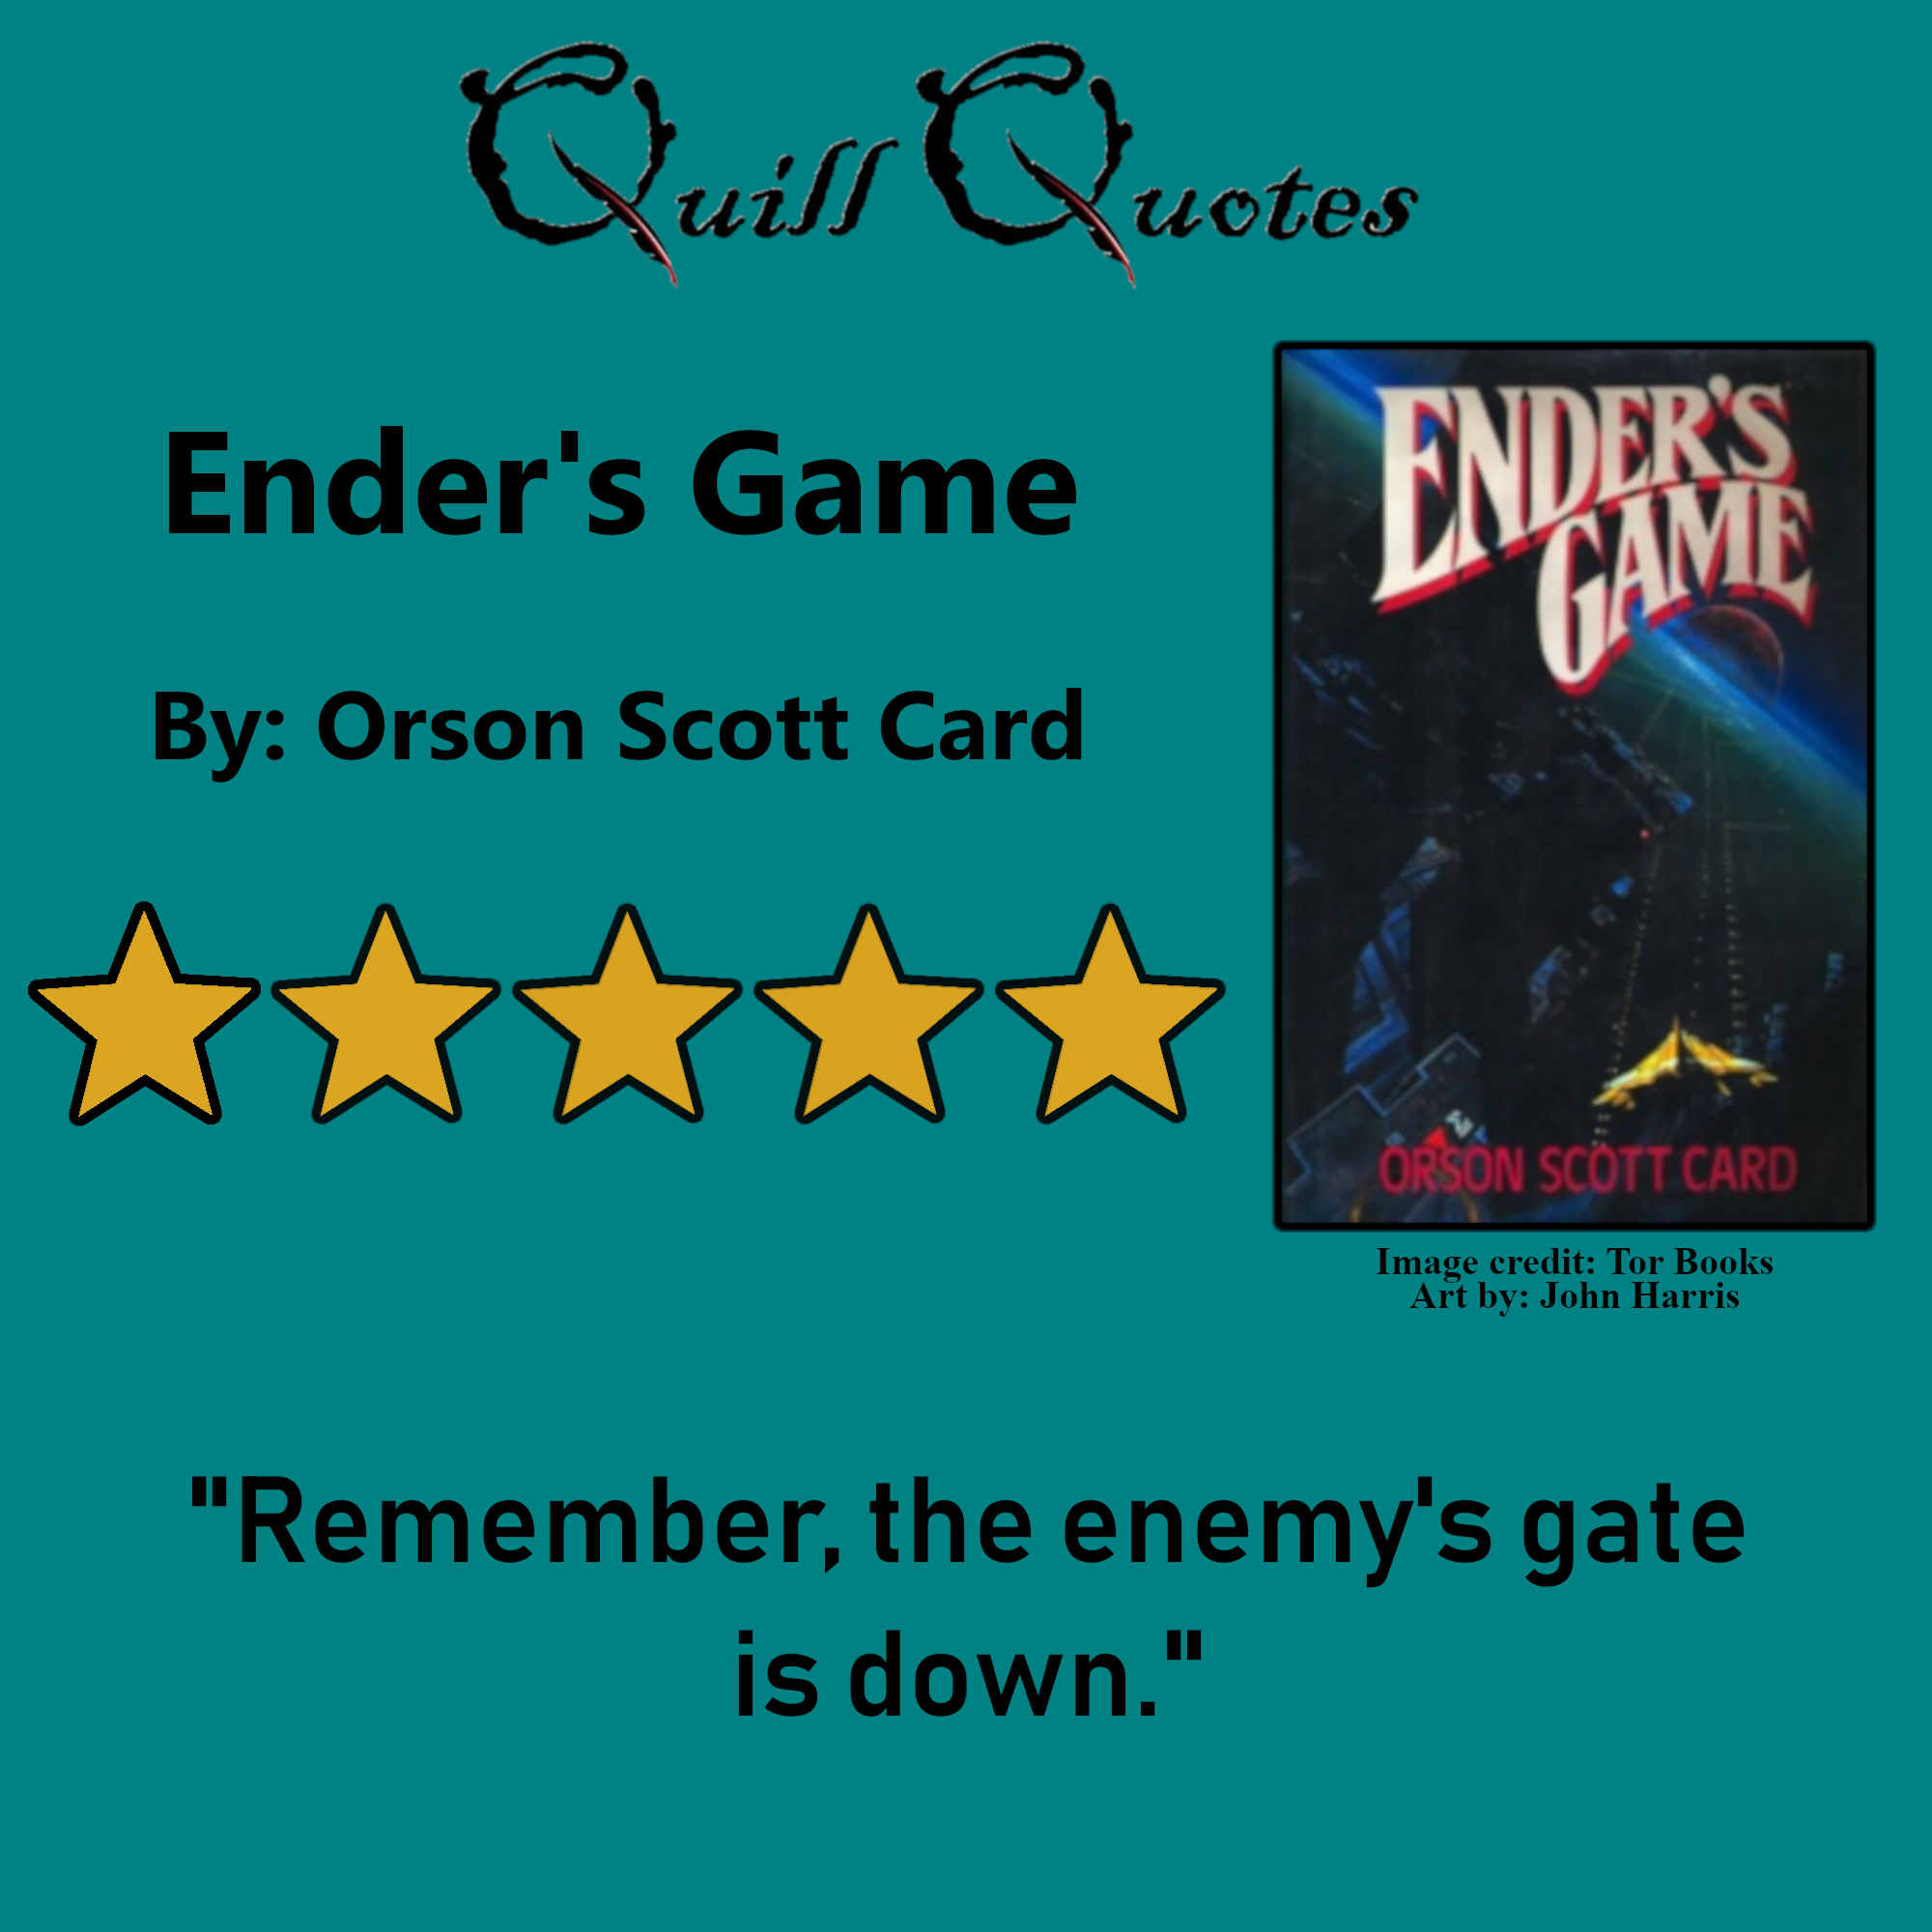 Ender's Game Summary